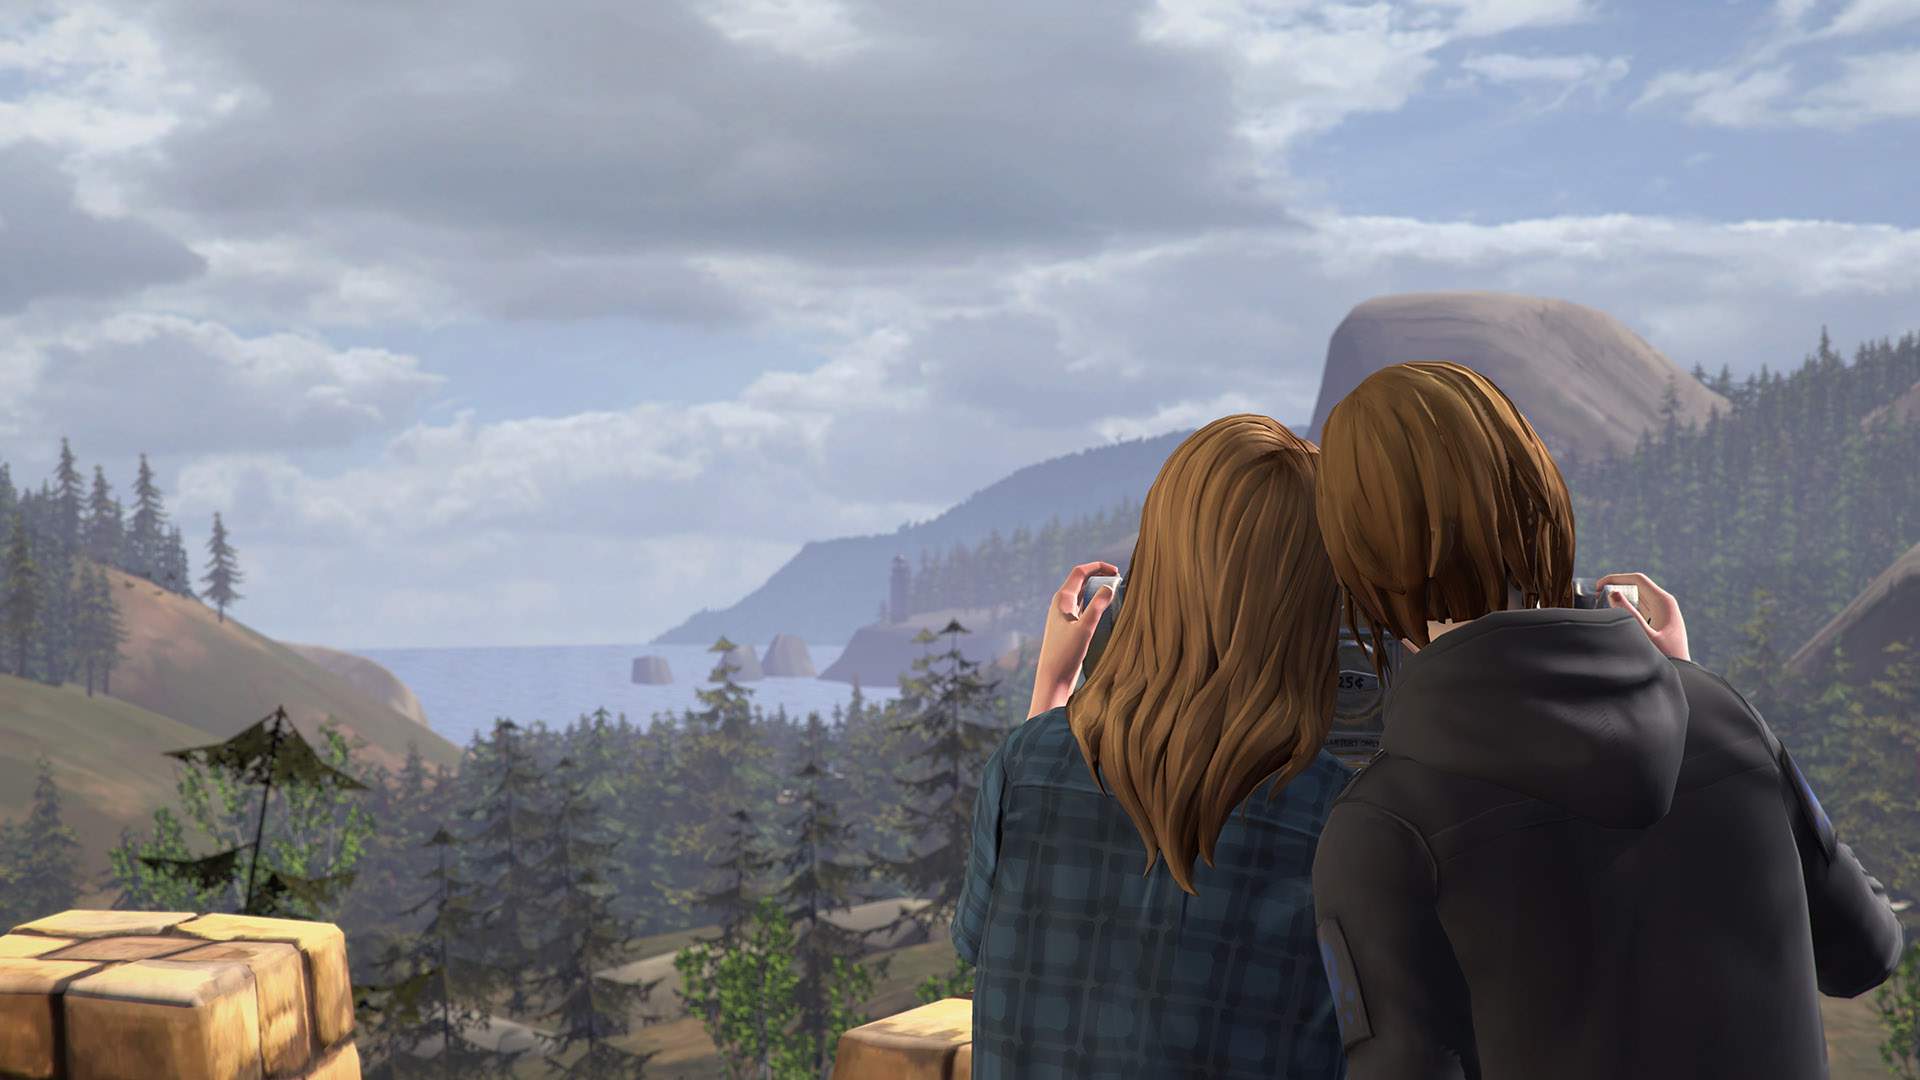 Rachel Amber and Chloe Price take in the stunning view of Overlook Park: trees, mountains, sea, and glorious sky.